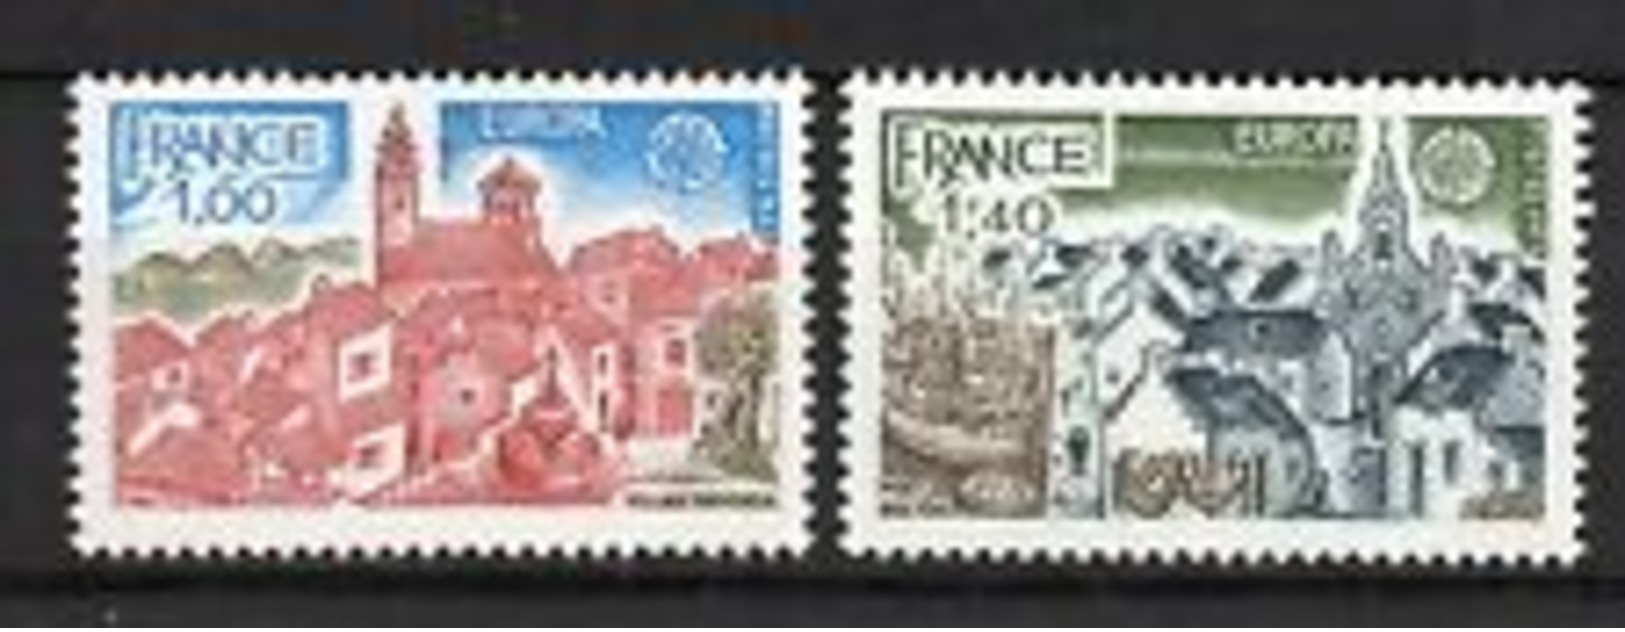 Timbres EUROPA CEPT FRANCE De 1977 N° Y&t 1928/1929 Neuf(s) ** MNH Luxe - 1977